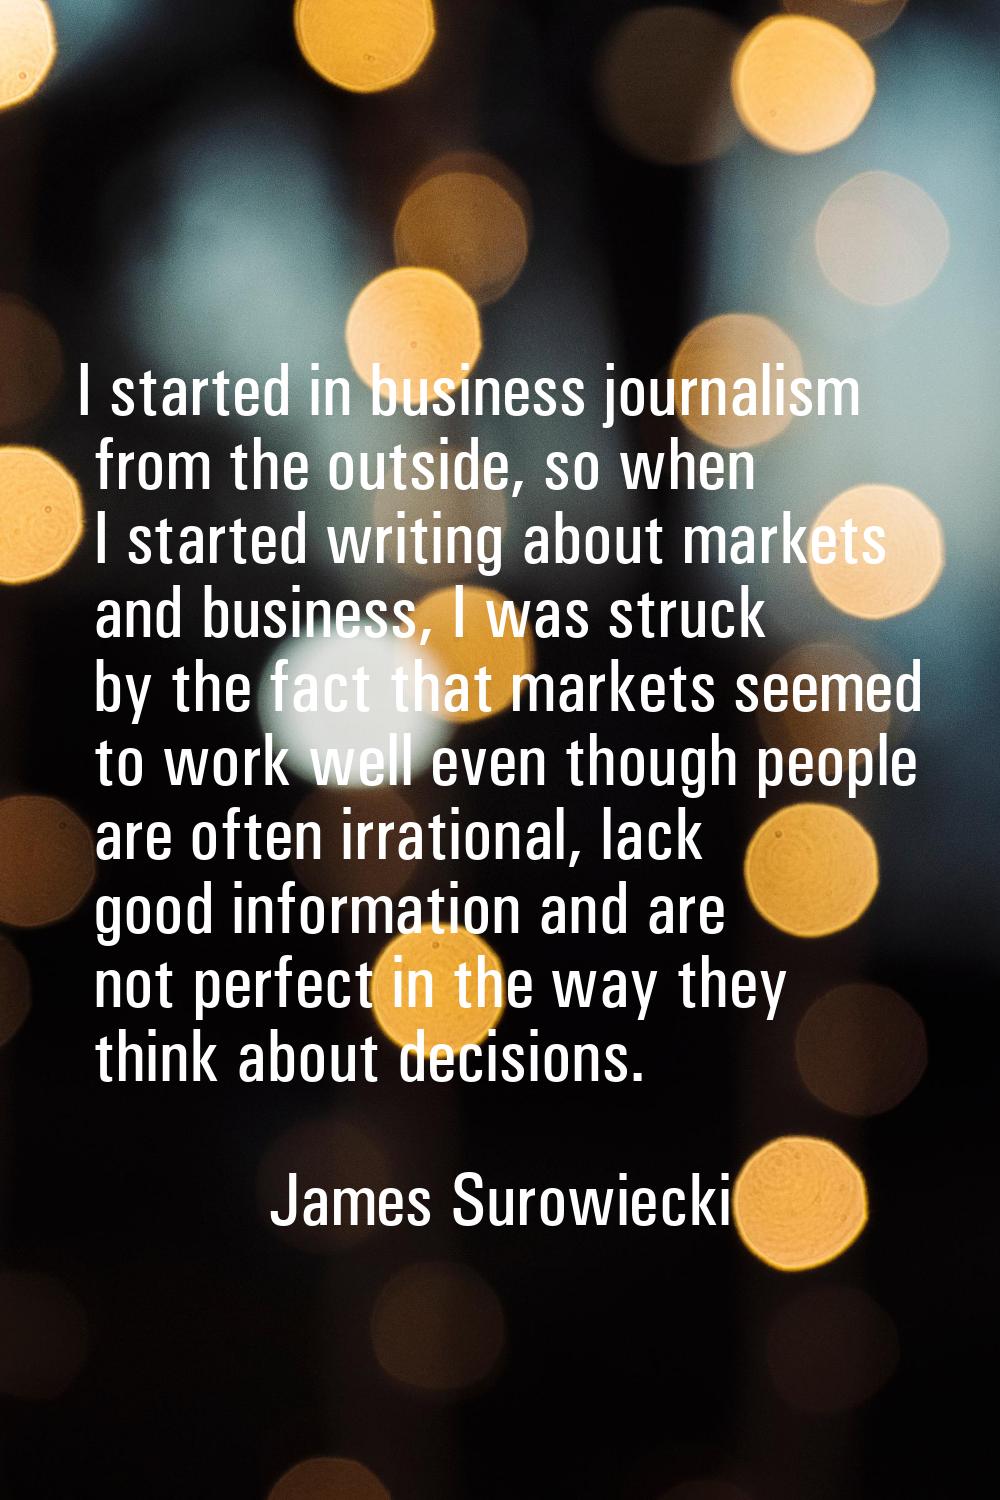 I started in business journalism from the outside, so when I started writing about markets and busi